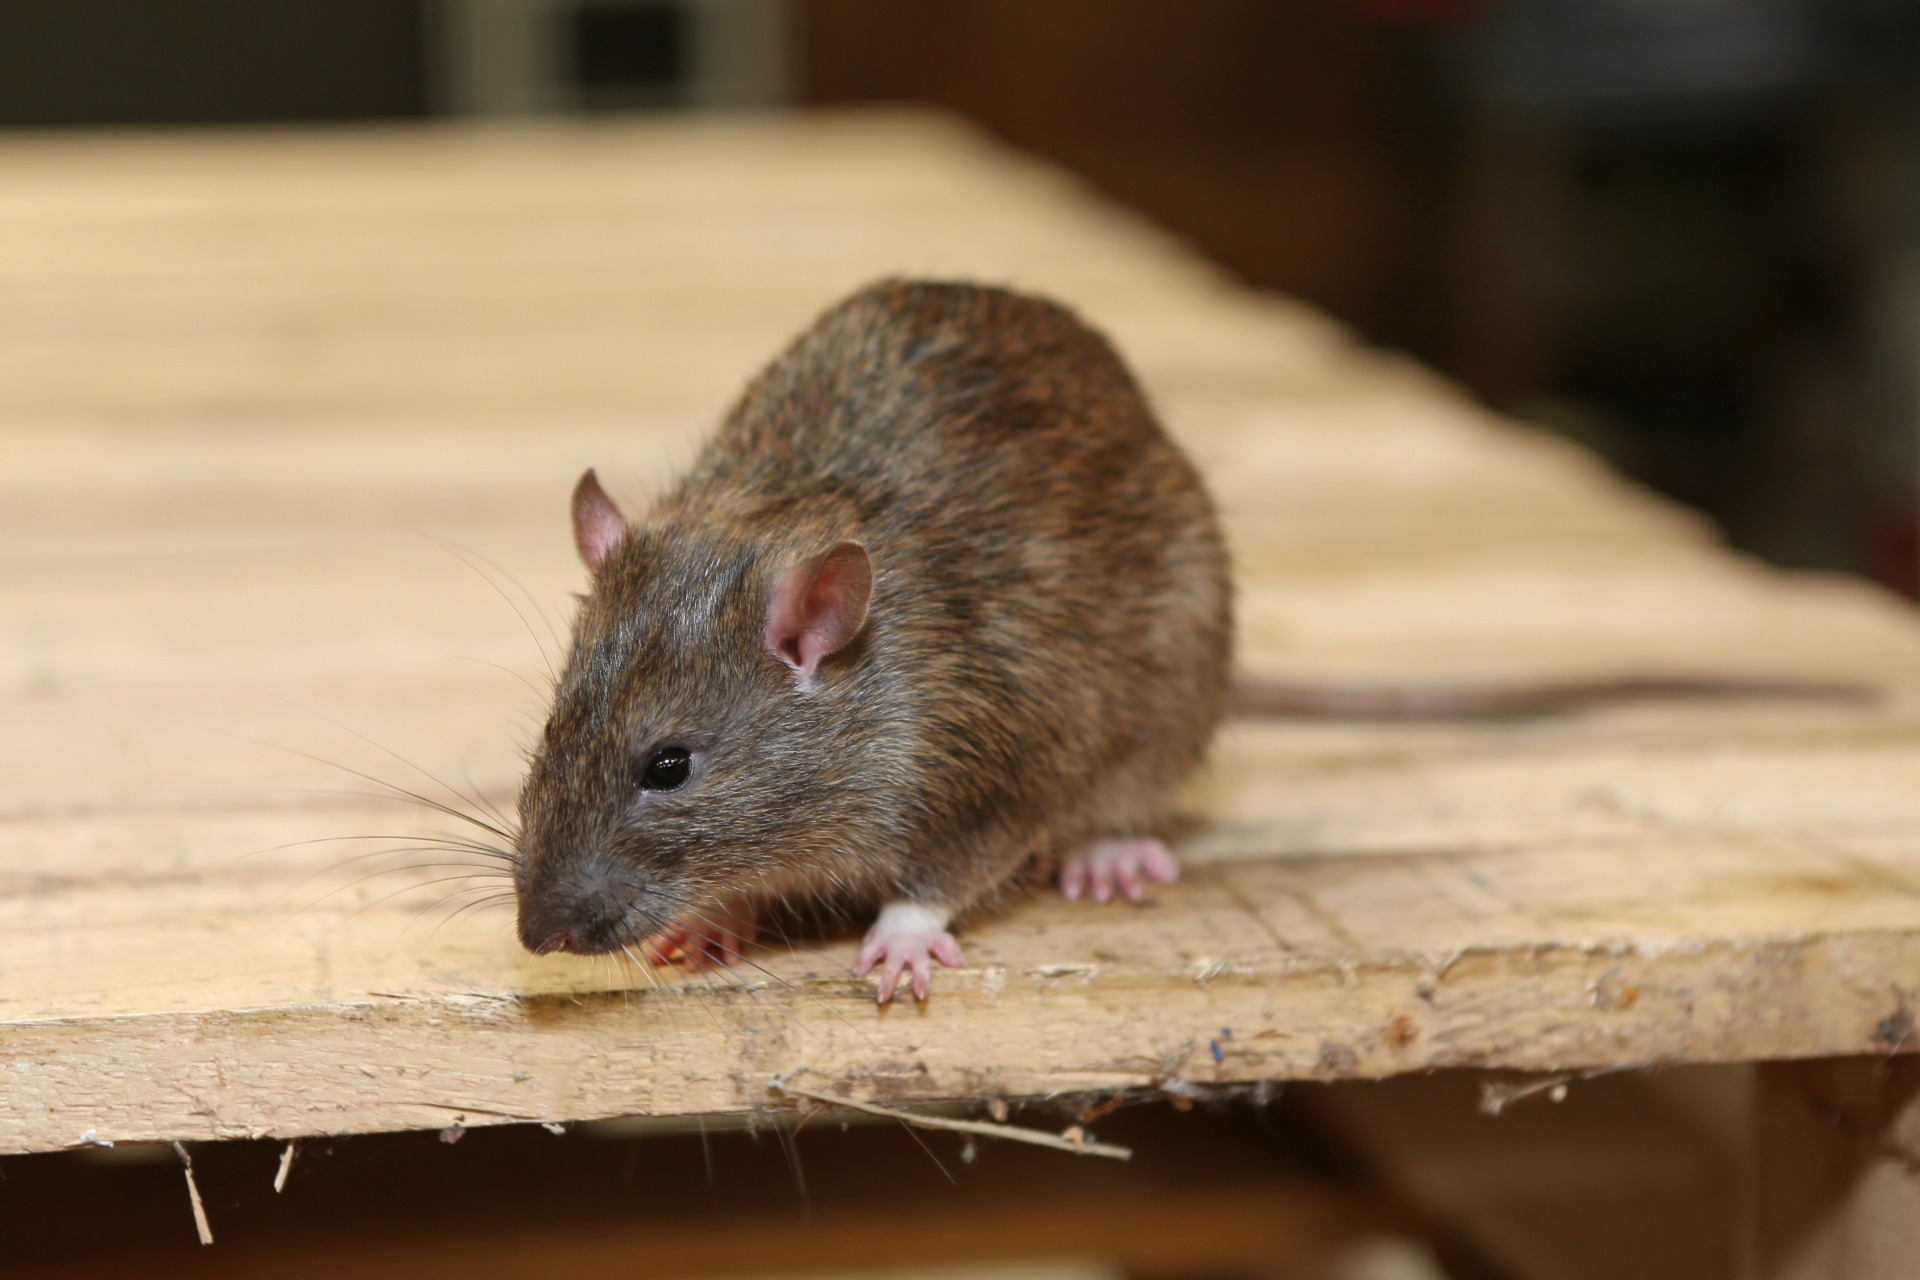 Rat Control, Pest Control in Penge, Anerley, SE20. Call Now 020 8166 9746